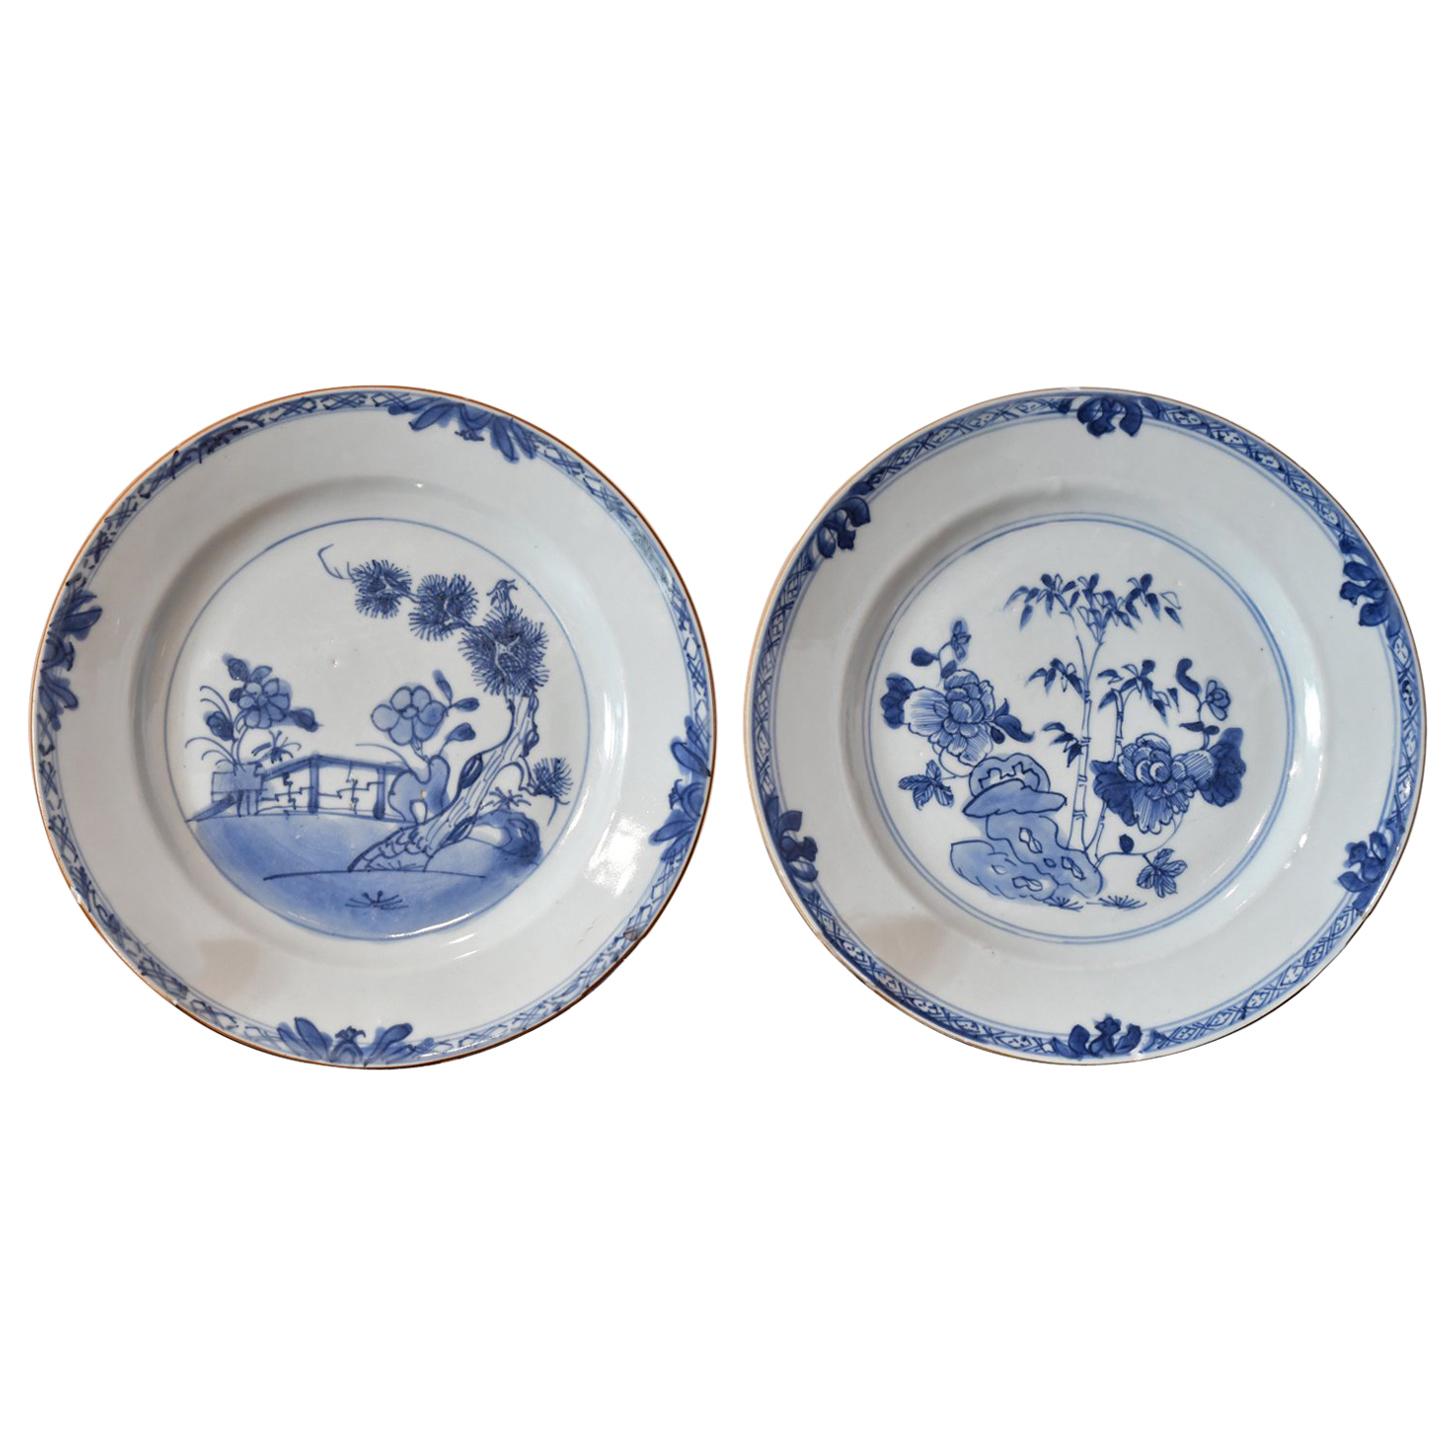 Pair of 18th Century Chinese Porcelain Blue & White Plates, Qing Qianlong